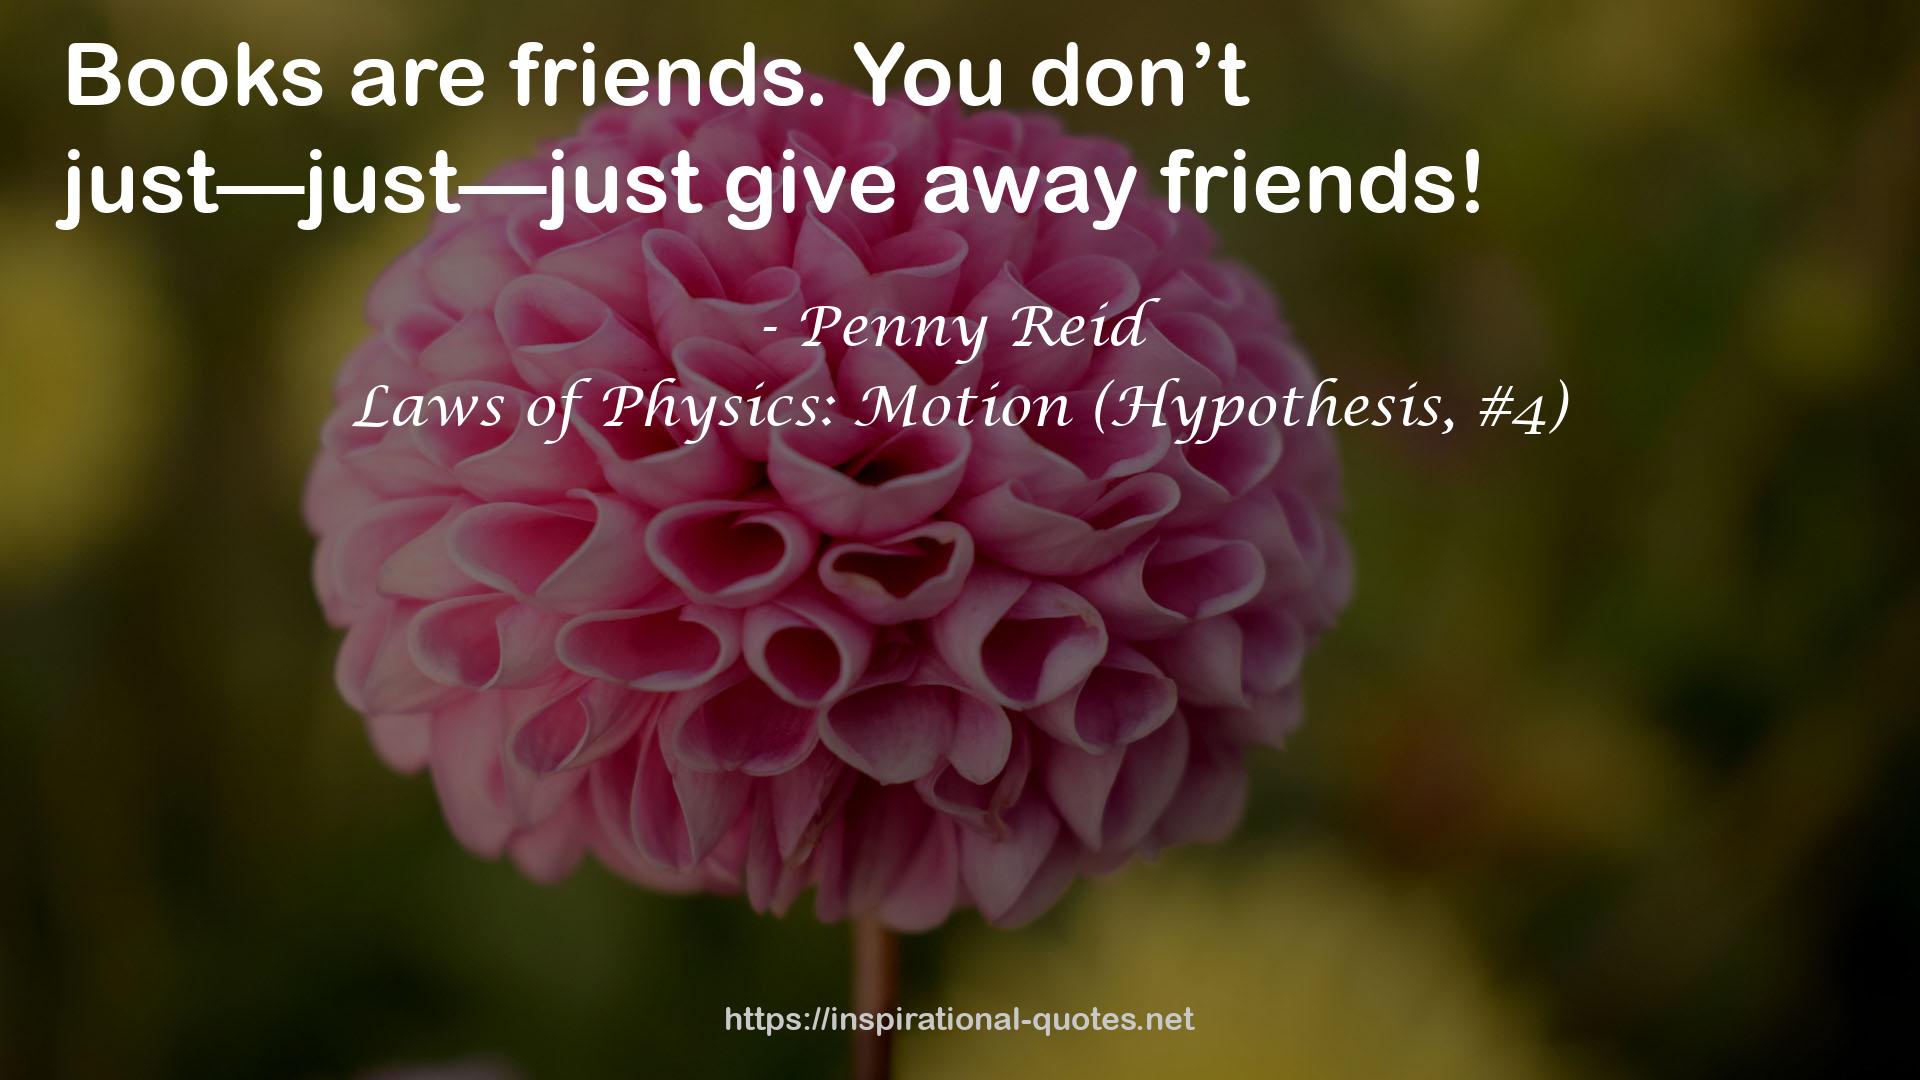 Laws of Physics: Motion (Hypothesis, #4) QUOTES